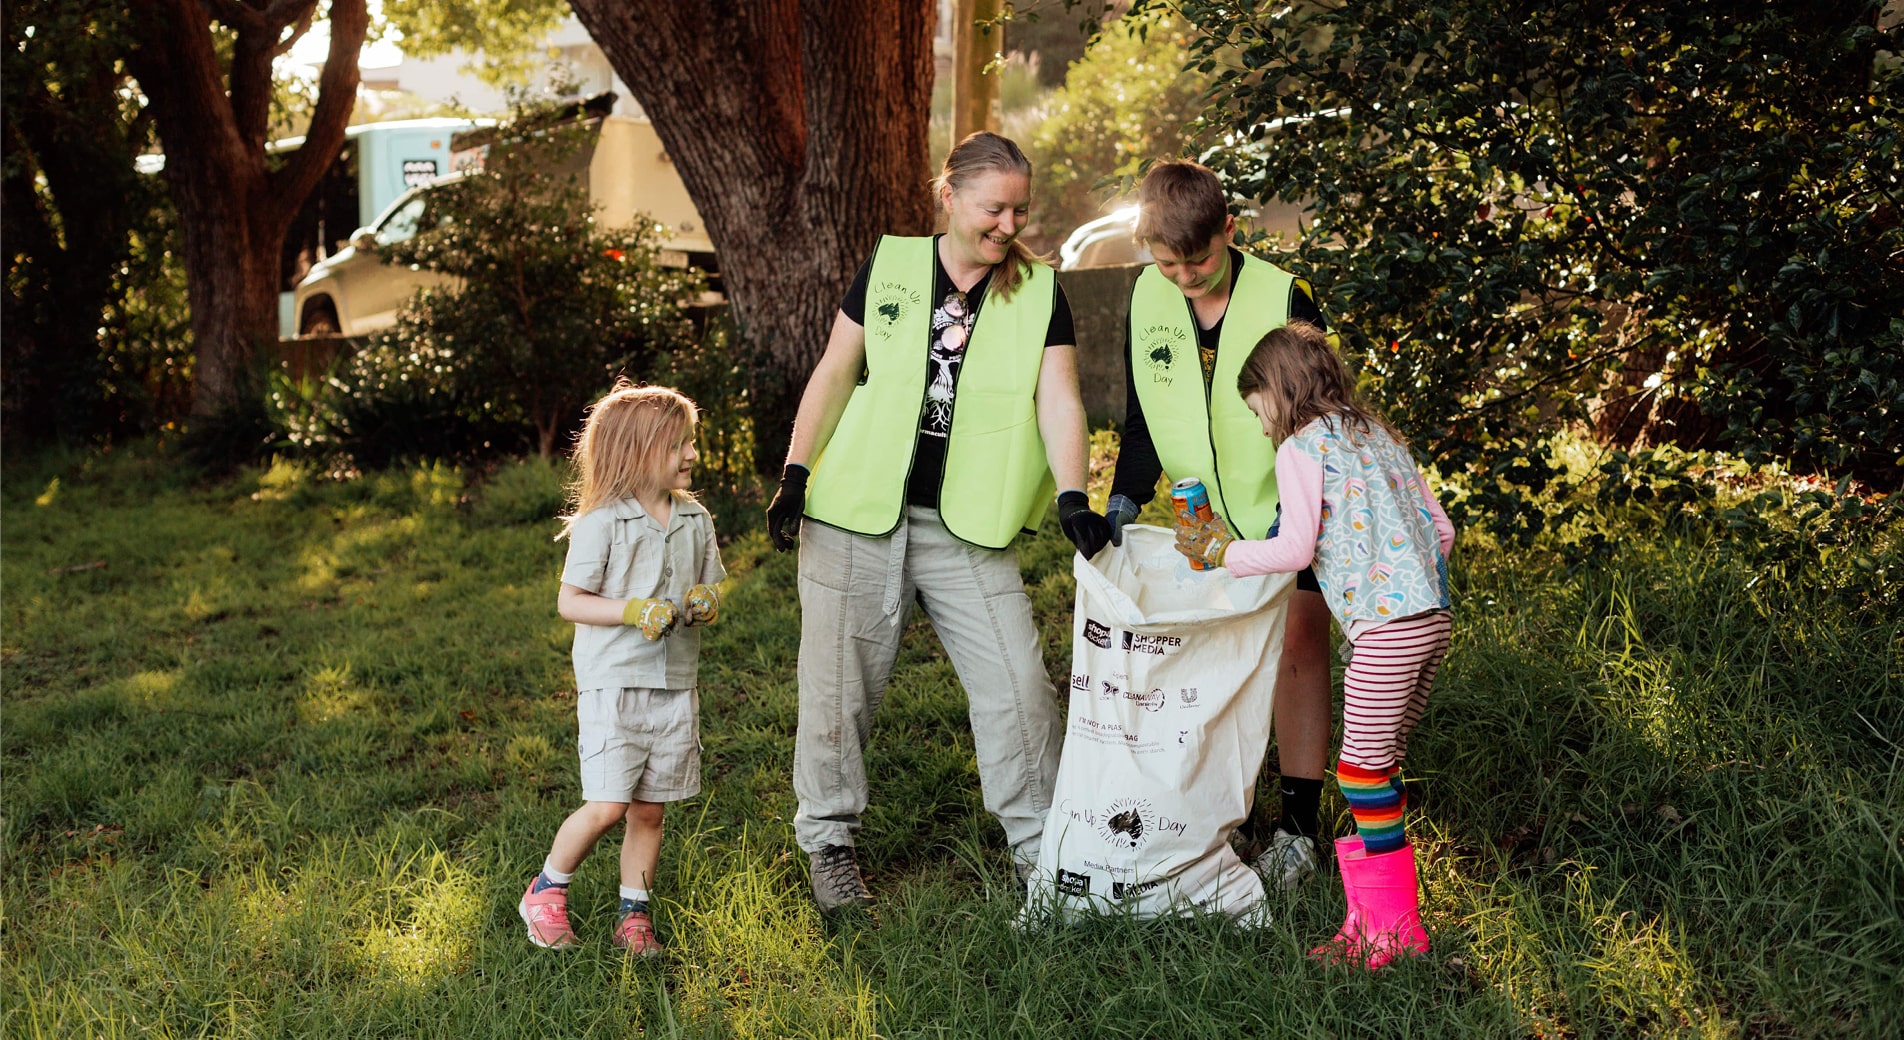 clean up australia day activities family